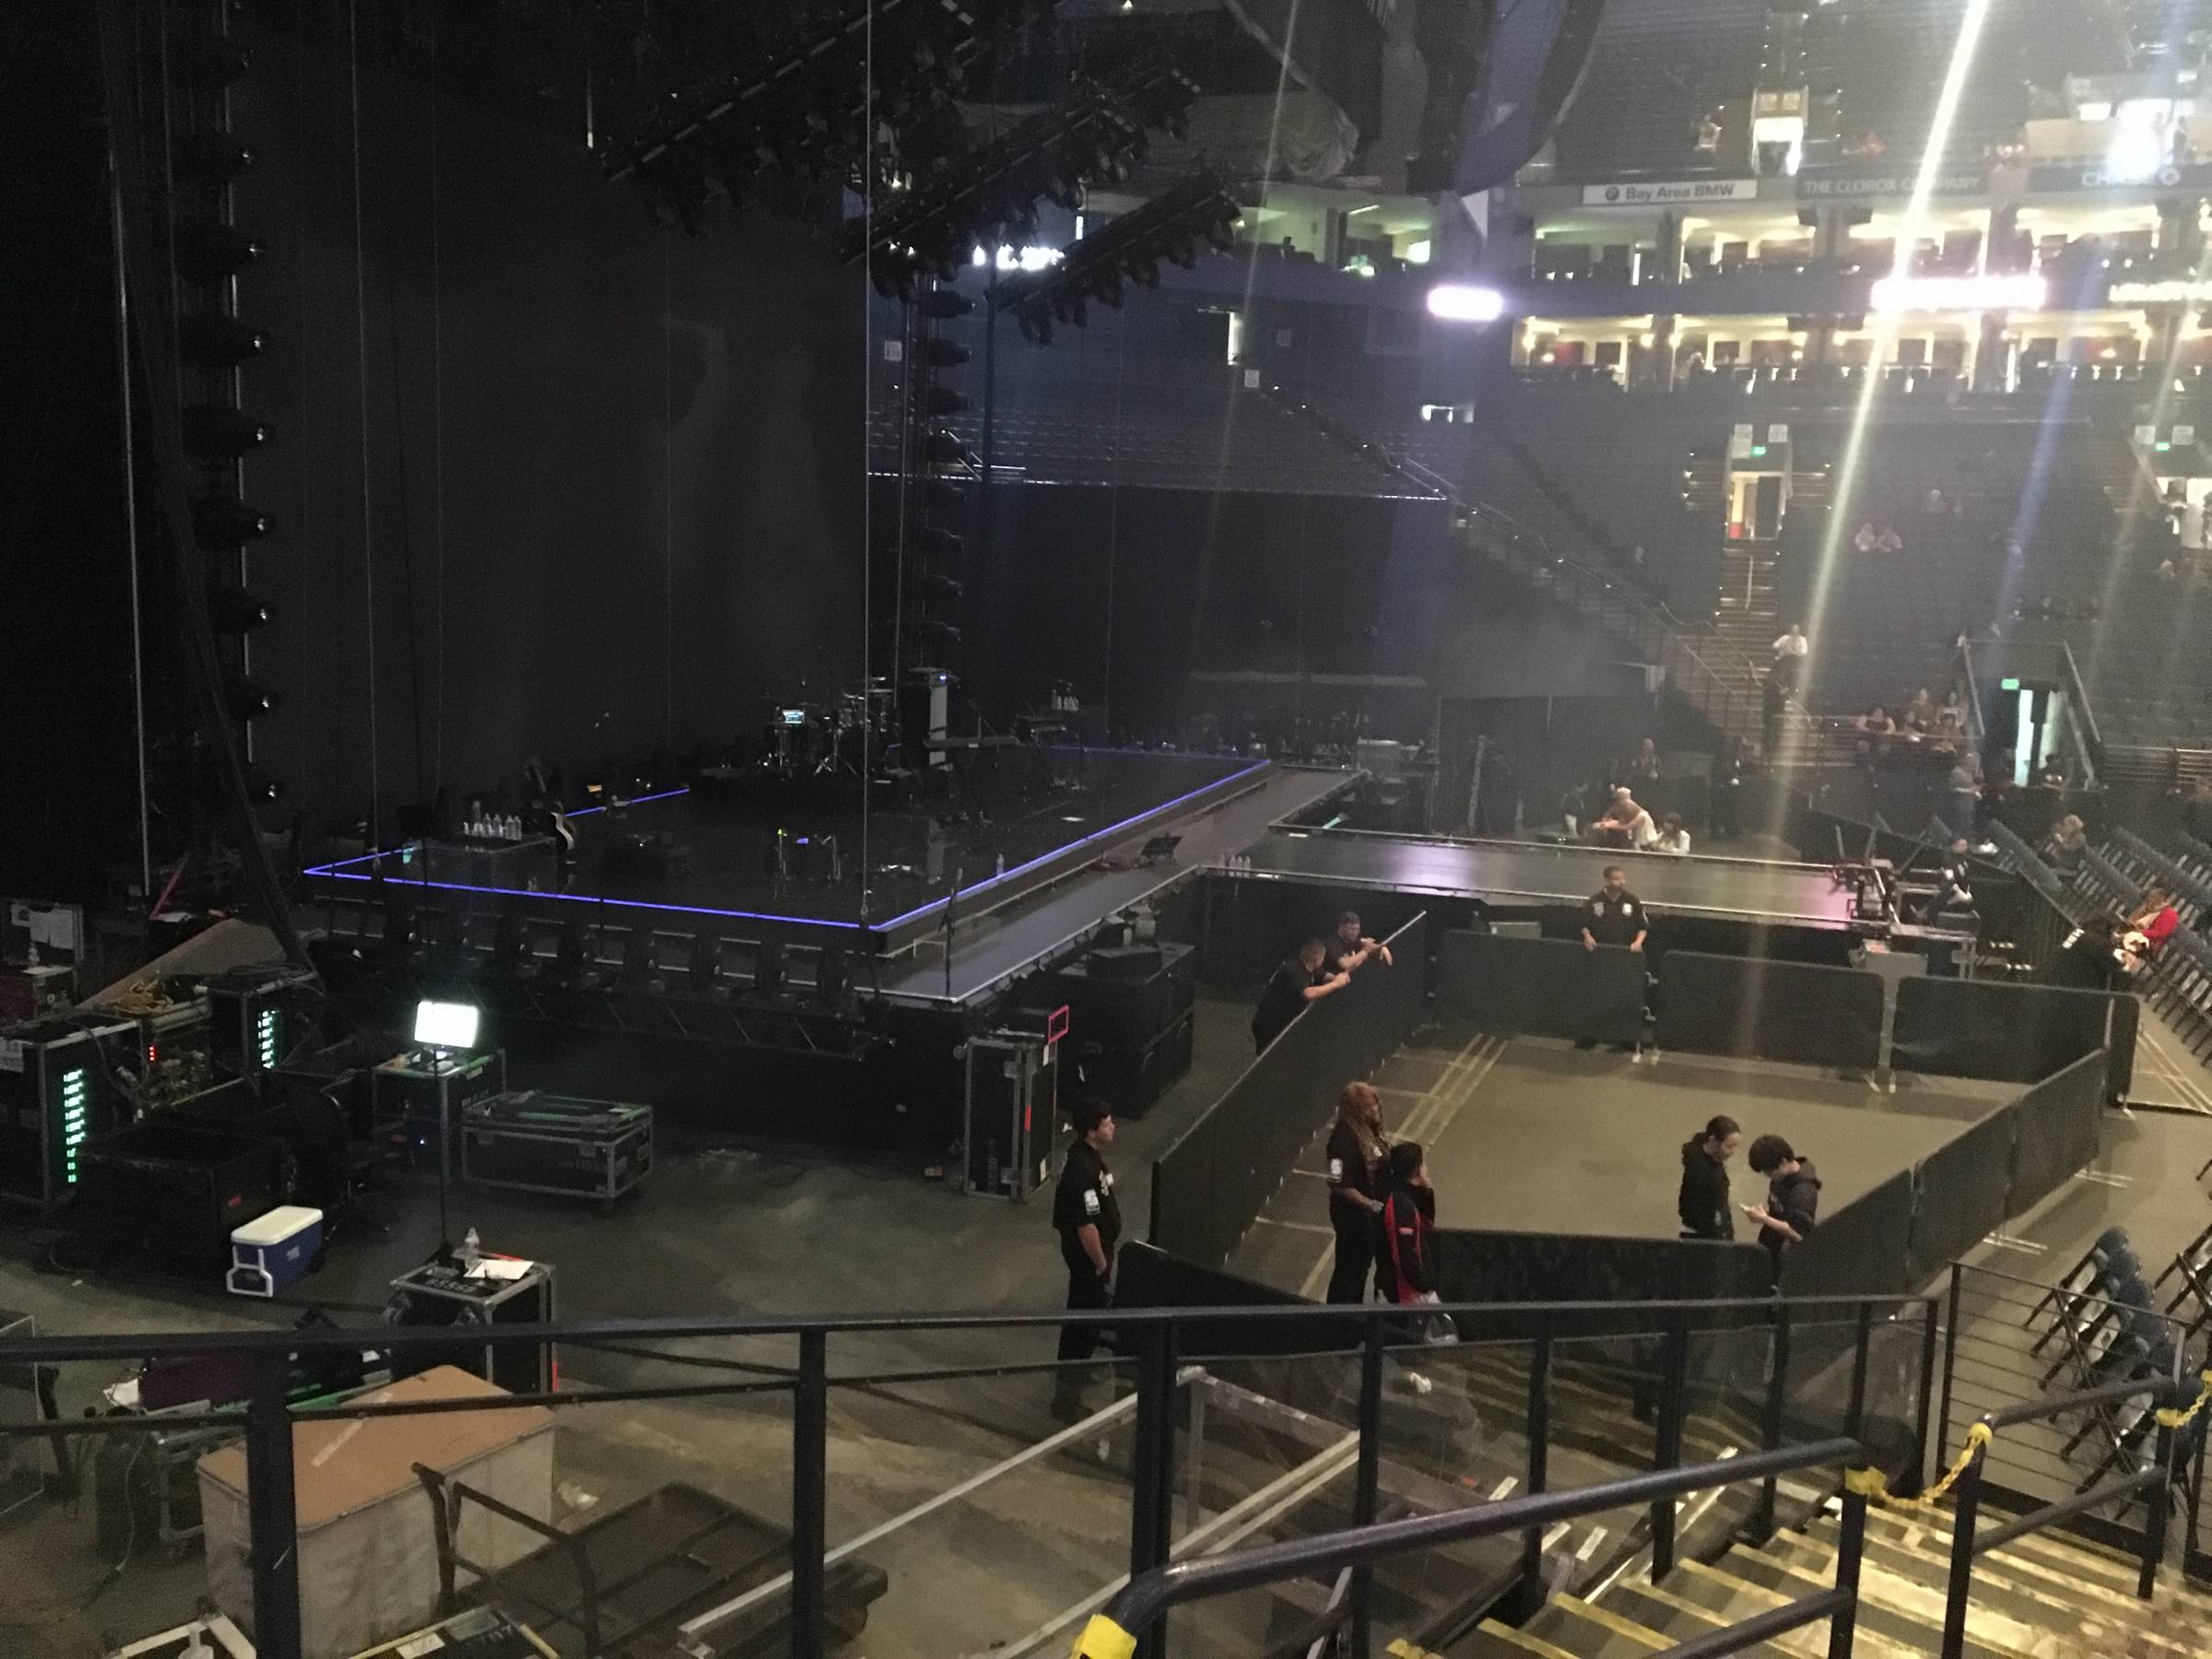 View of stage setup at Oakland Arena